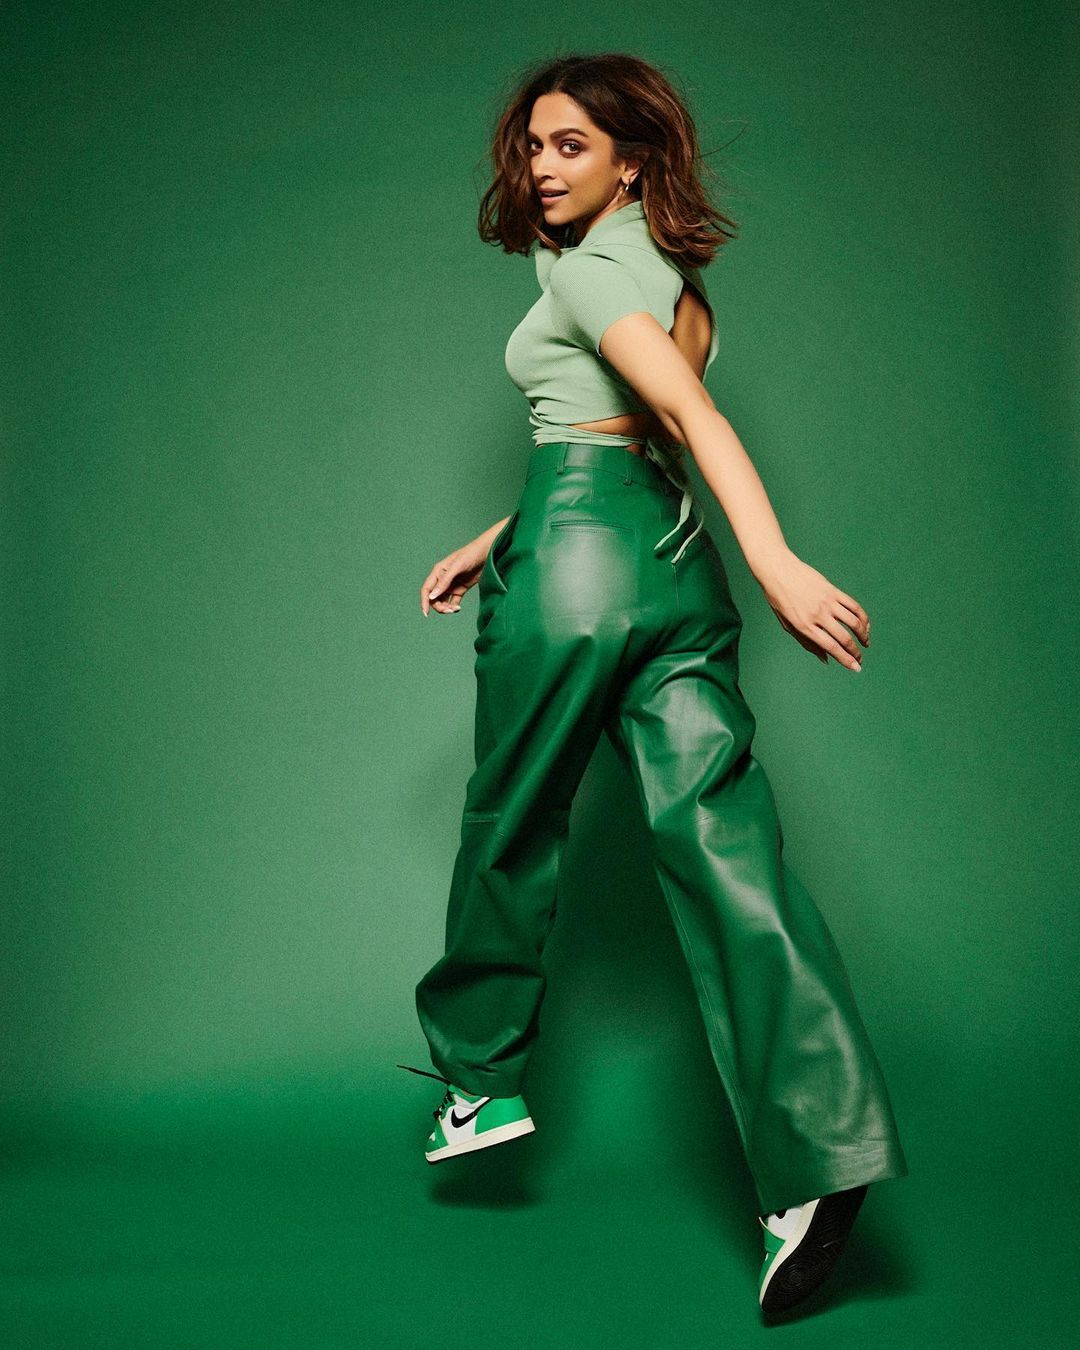 Deepika Padukone Looks Stunning In An All Green Outfit As She Runs Away From Alphonso Mangoes